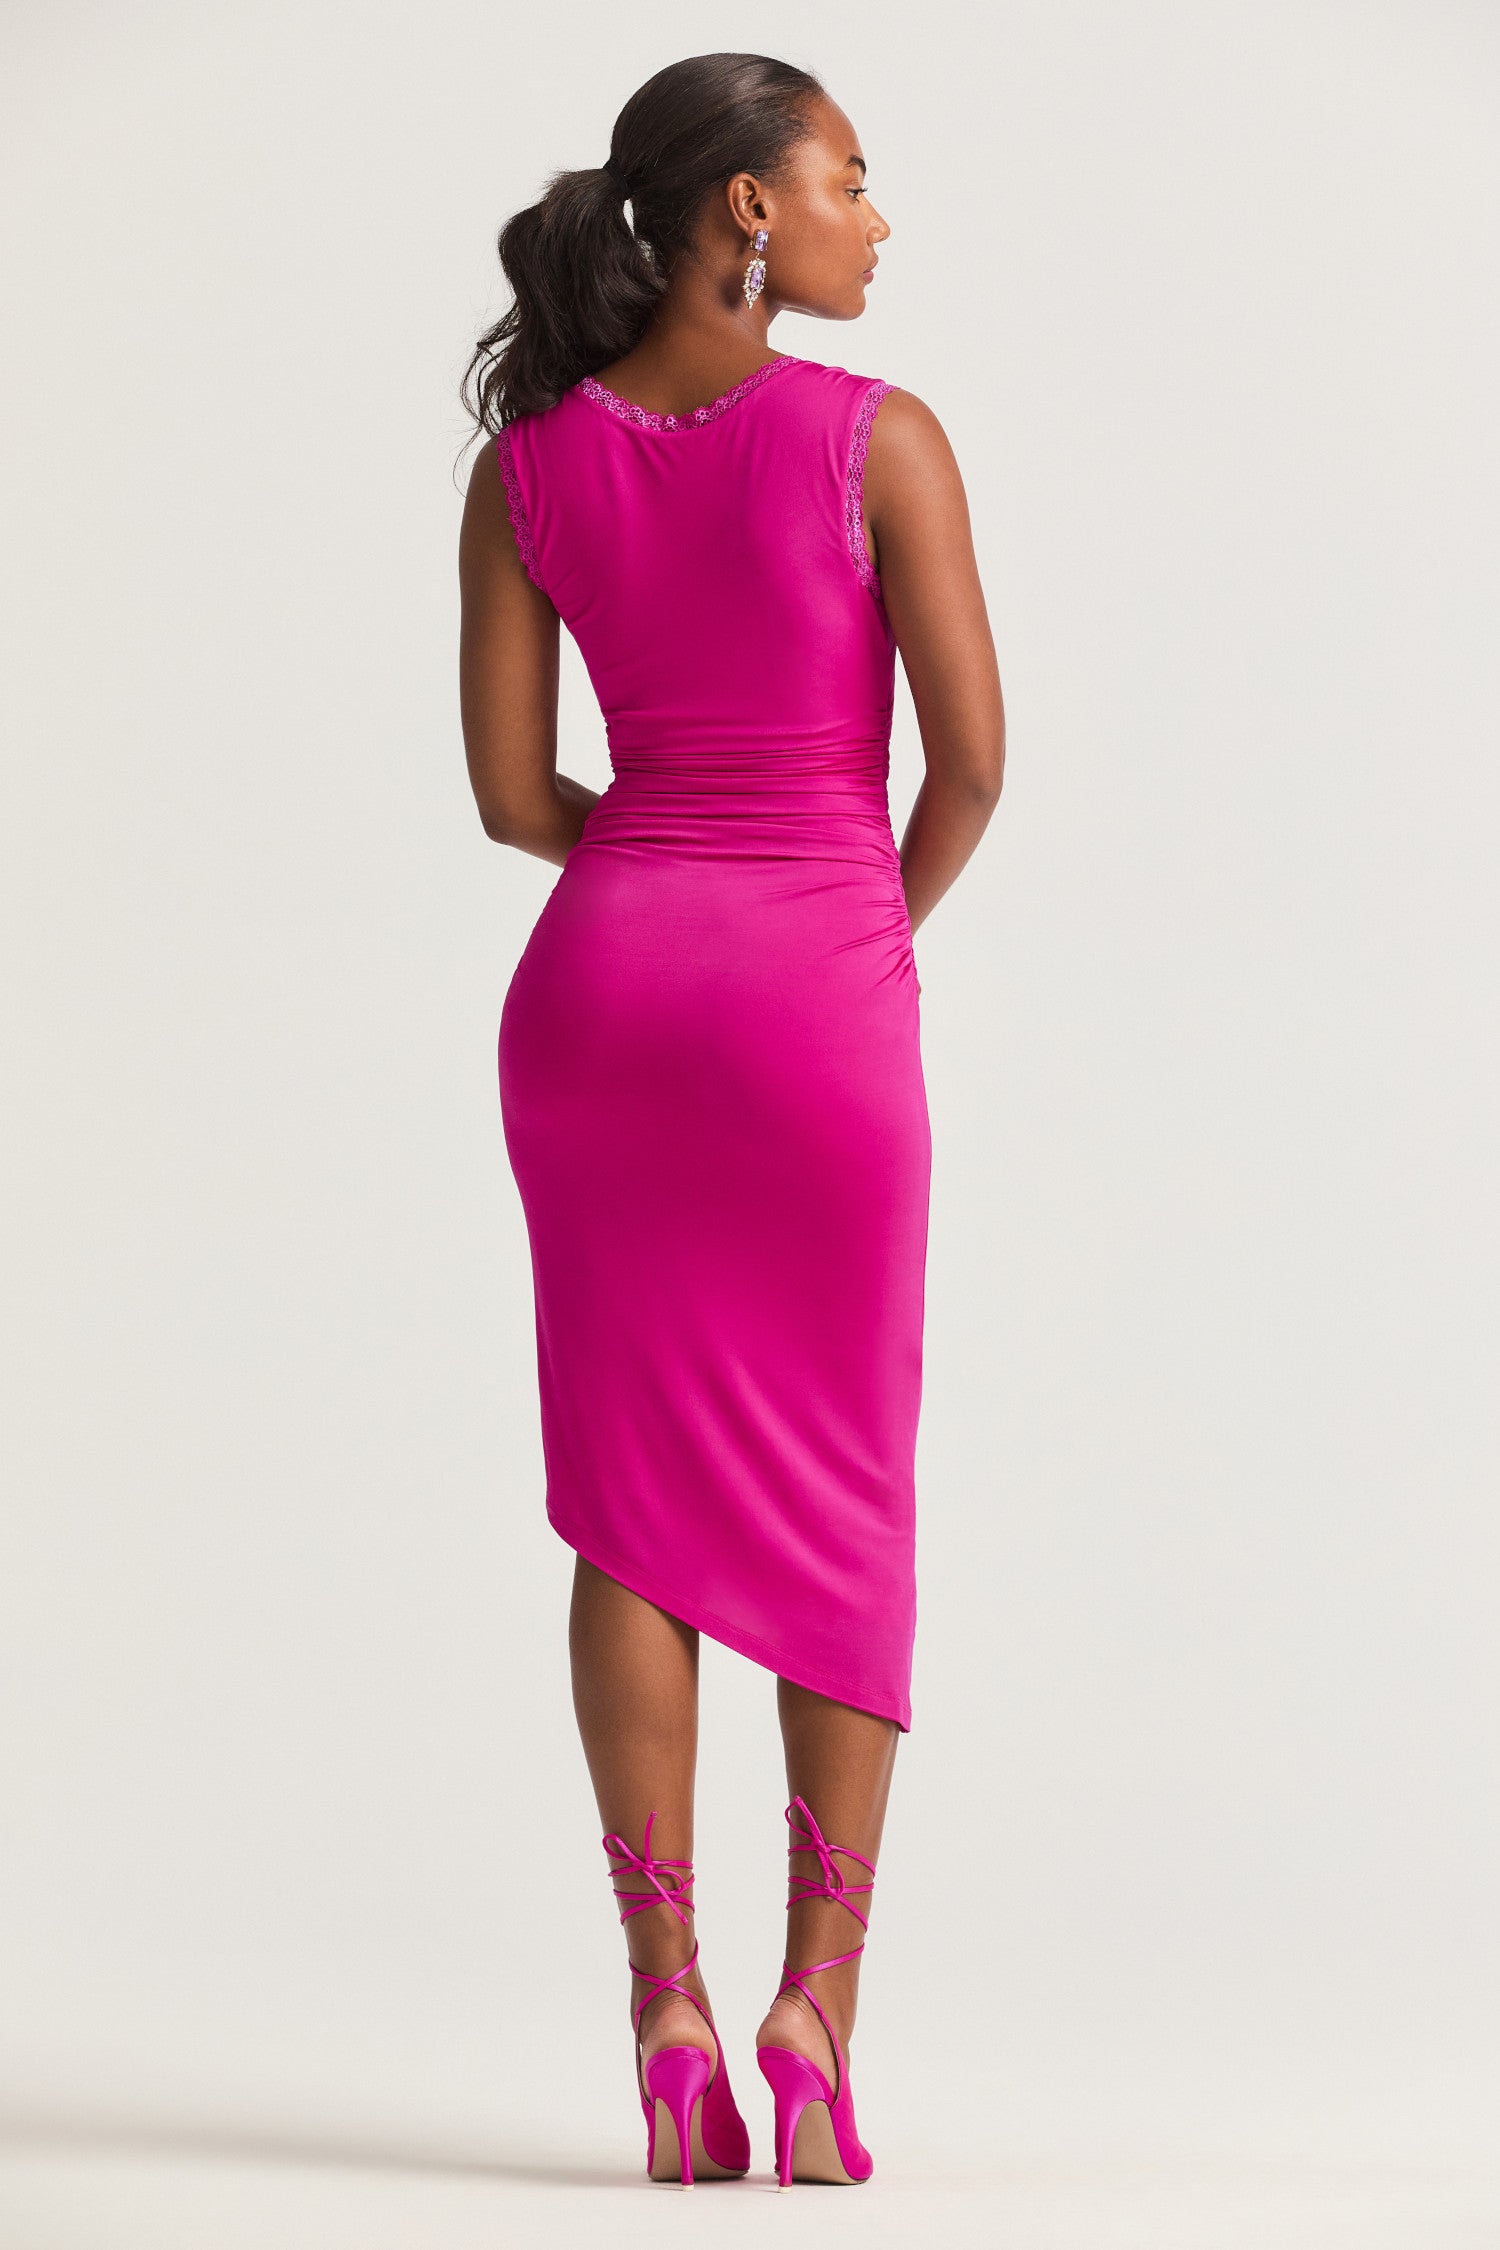 Bright pink midi dress with slinky ruched jersey fabric with a slim fit, a round scoop neckline and falls to an asymmetrical hem finish. 